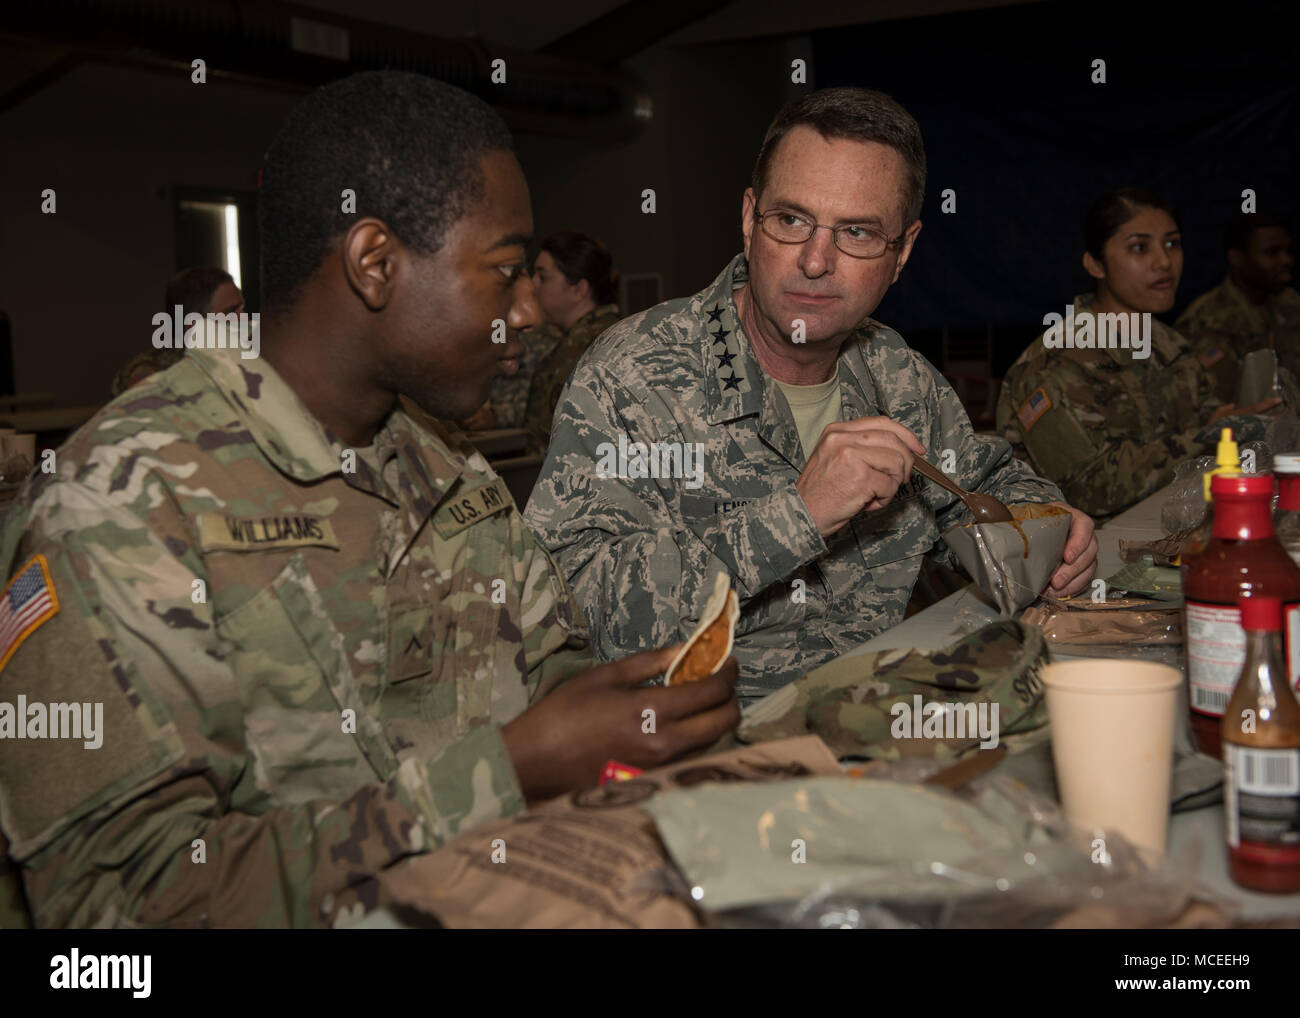 General Joseph L. Lengyel, Chief of the National Guard Bureau, has lunch with Pvt. Darryl Williams and Soldiers of the South Carolina Army National Guard who are participating in Guardian Response 18, April 14, 2018, North Vernon, Indiana. (U.S. Army National Guard photo by Sgt. Brian Calhoun, 108th Public Affairs Det.) Stock Photo